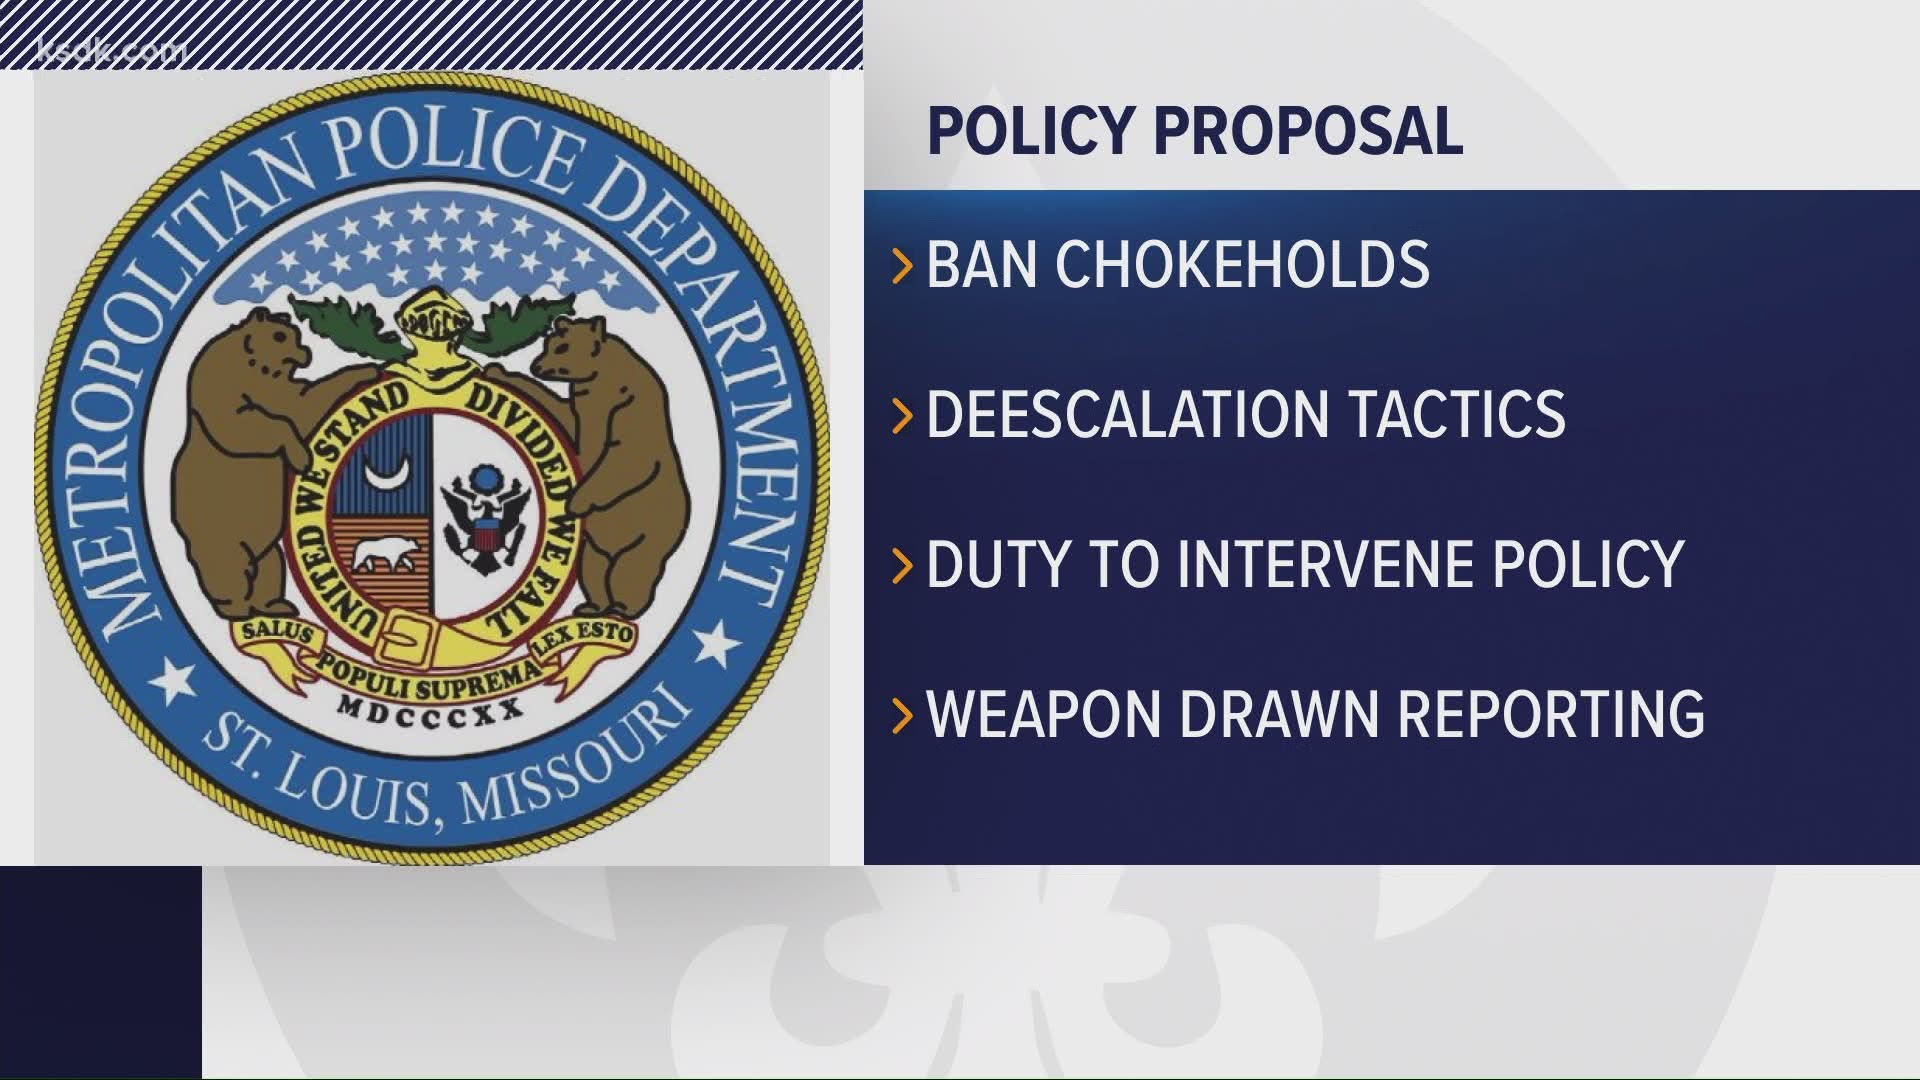 The St. Louis Board of Aldermen proposal is expected to address chokeholds, de-escalation tactics and require reporting when a weapon is drawn.